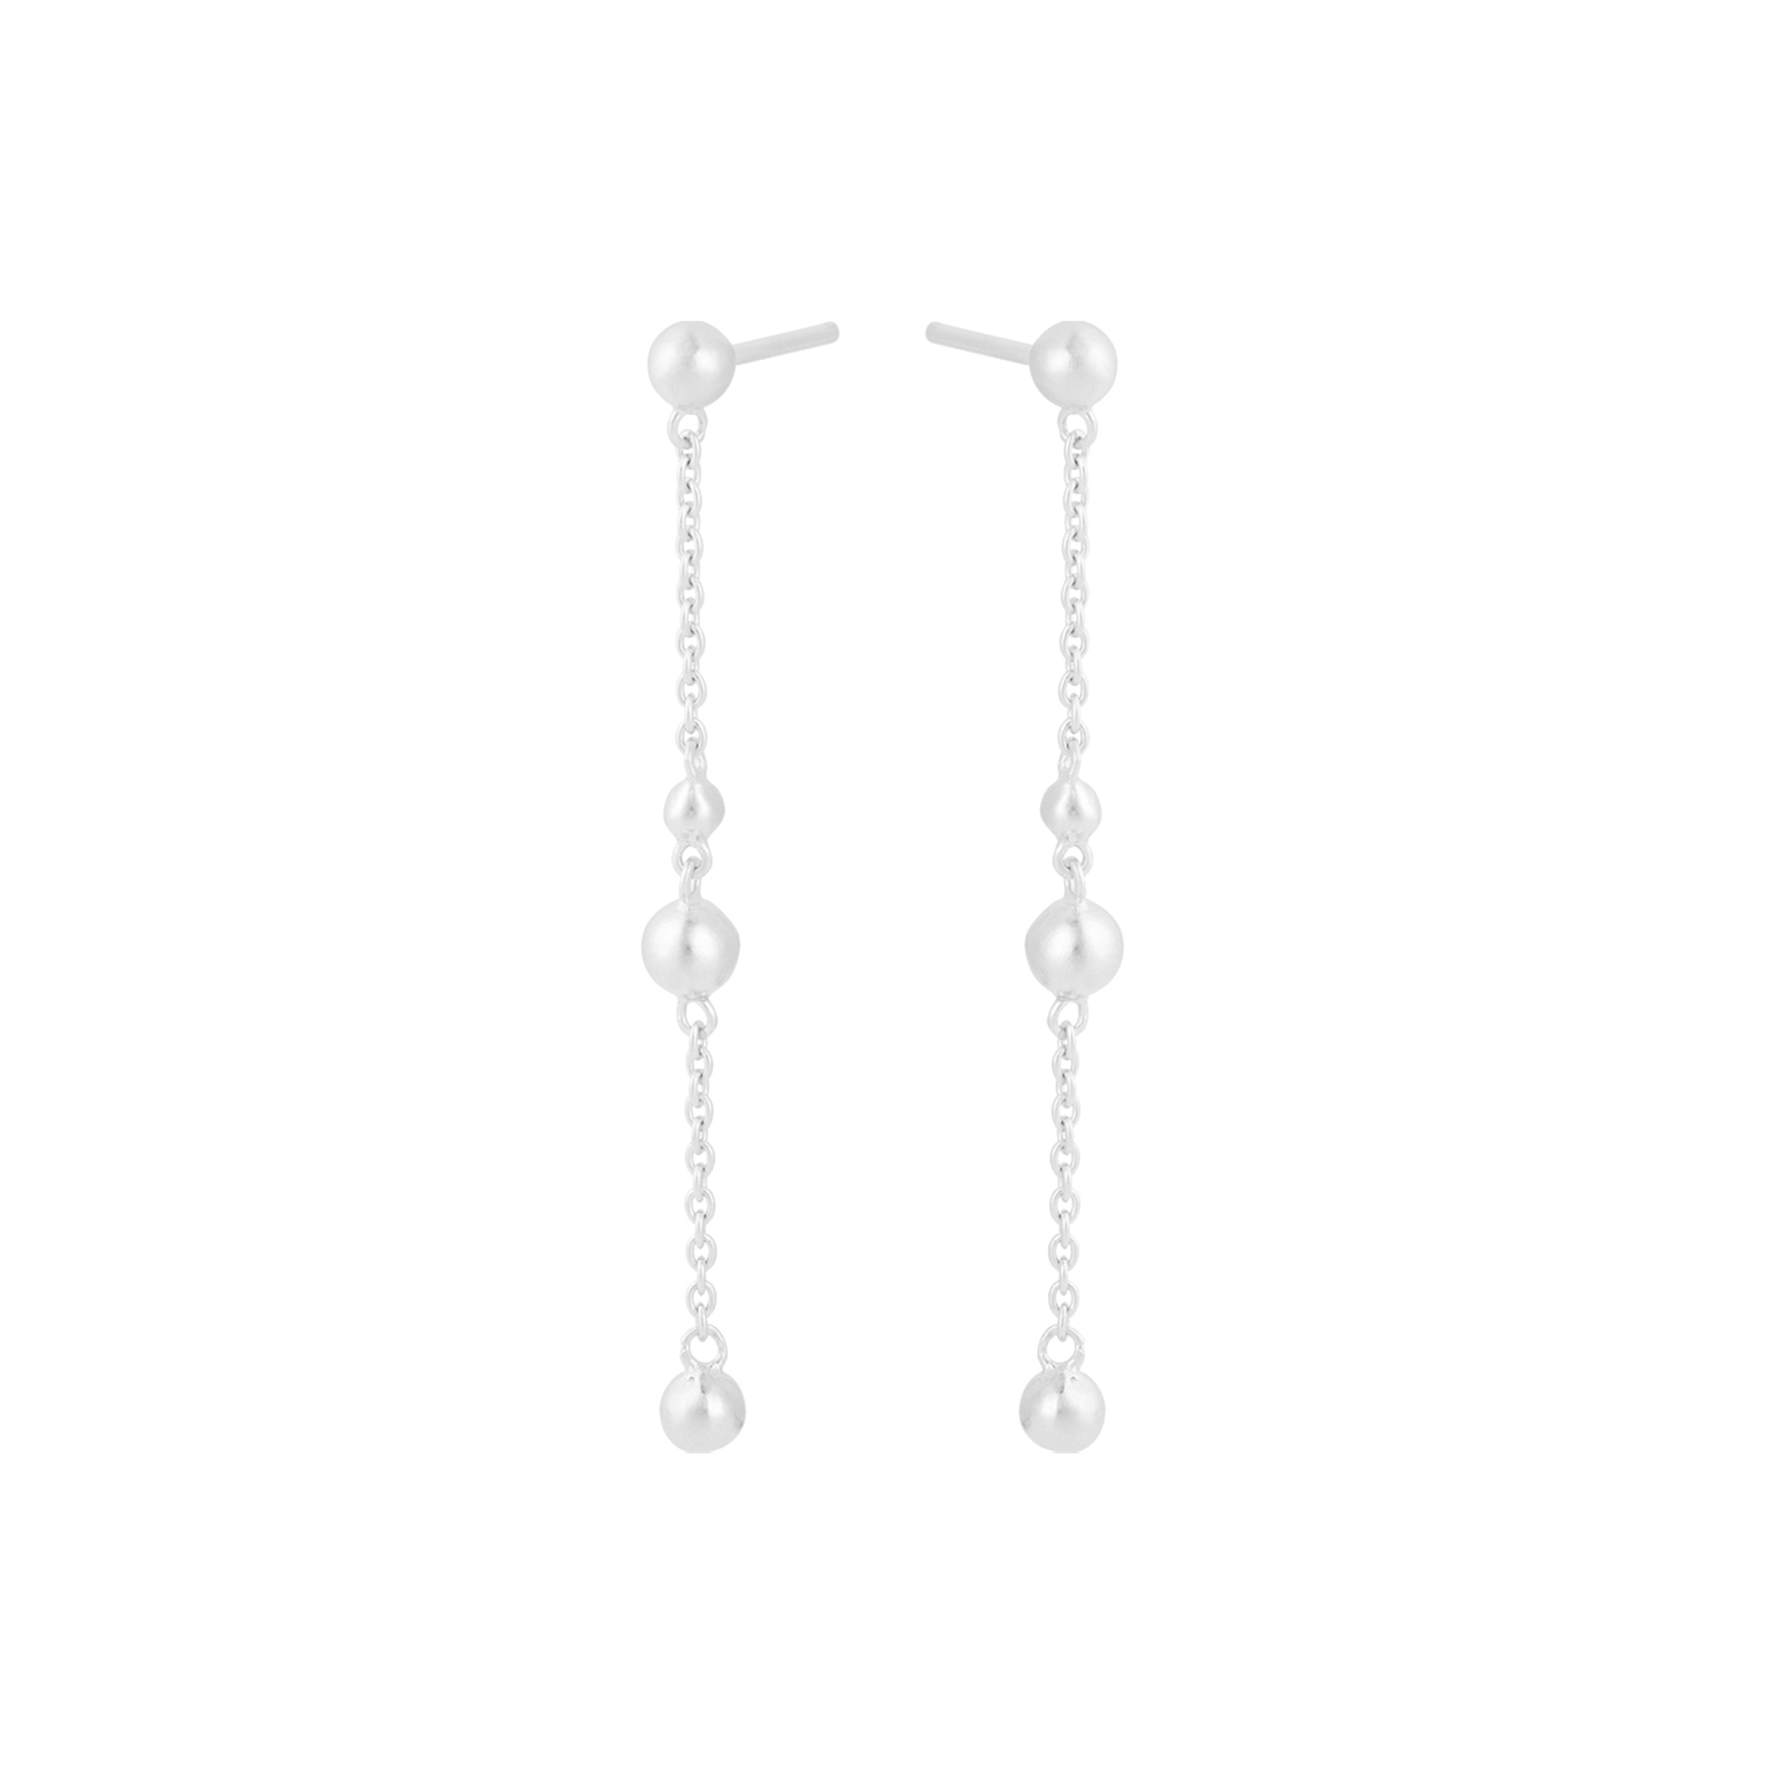 Comet Earchains from Pernille Corydon in Silver Sterling 925